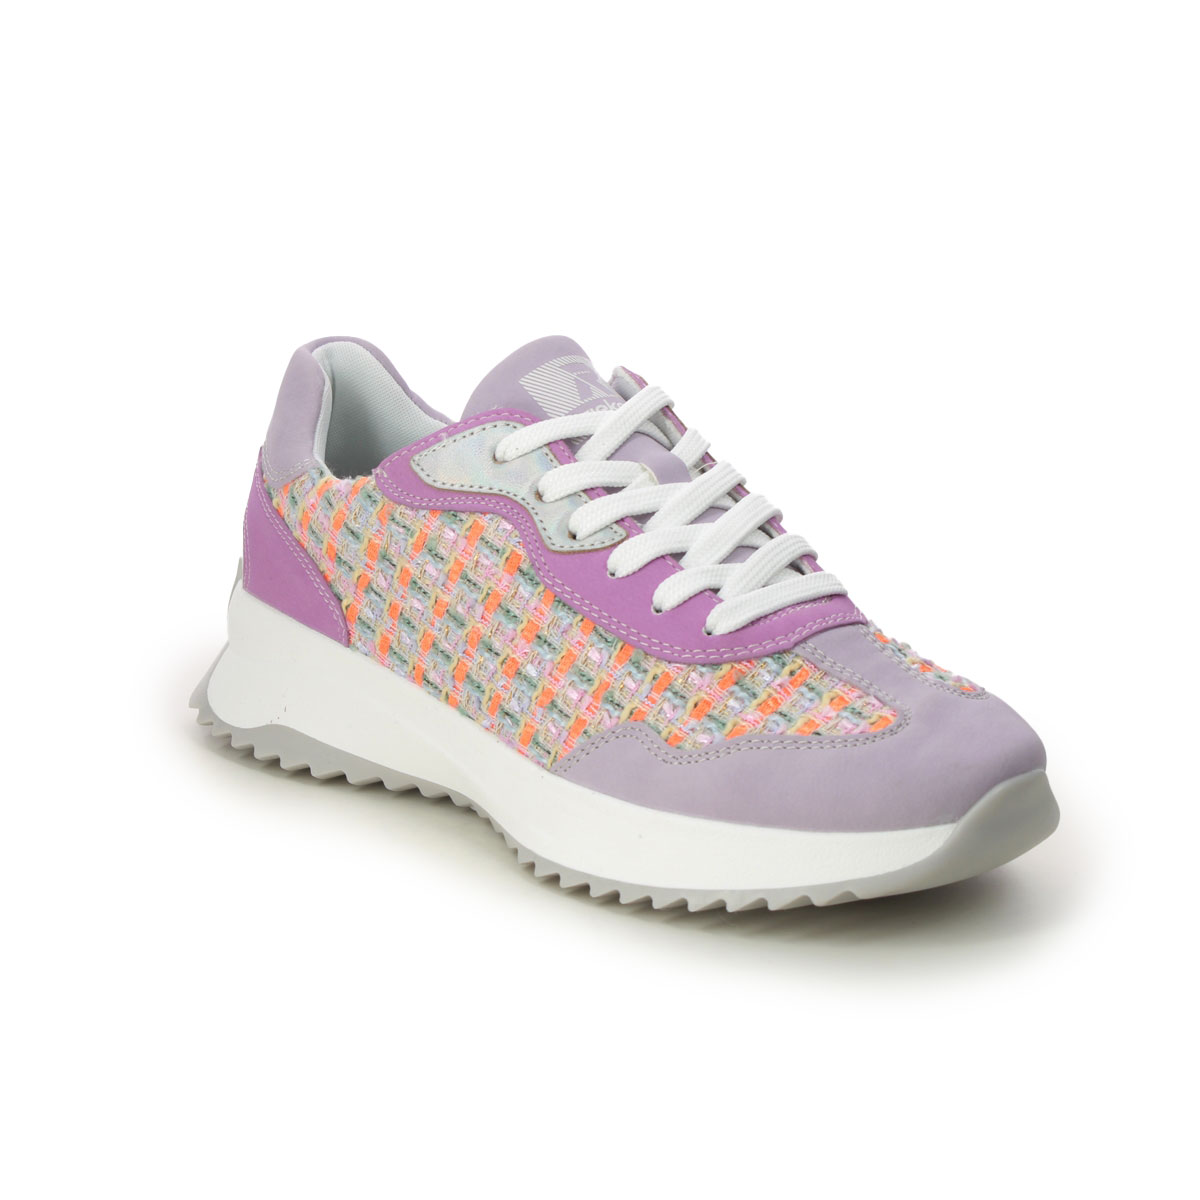 Rieker W1300-90 Lilac Multi Womens trainers in a Plain Textile in Size 37